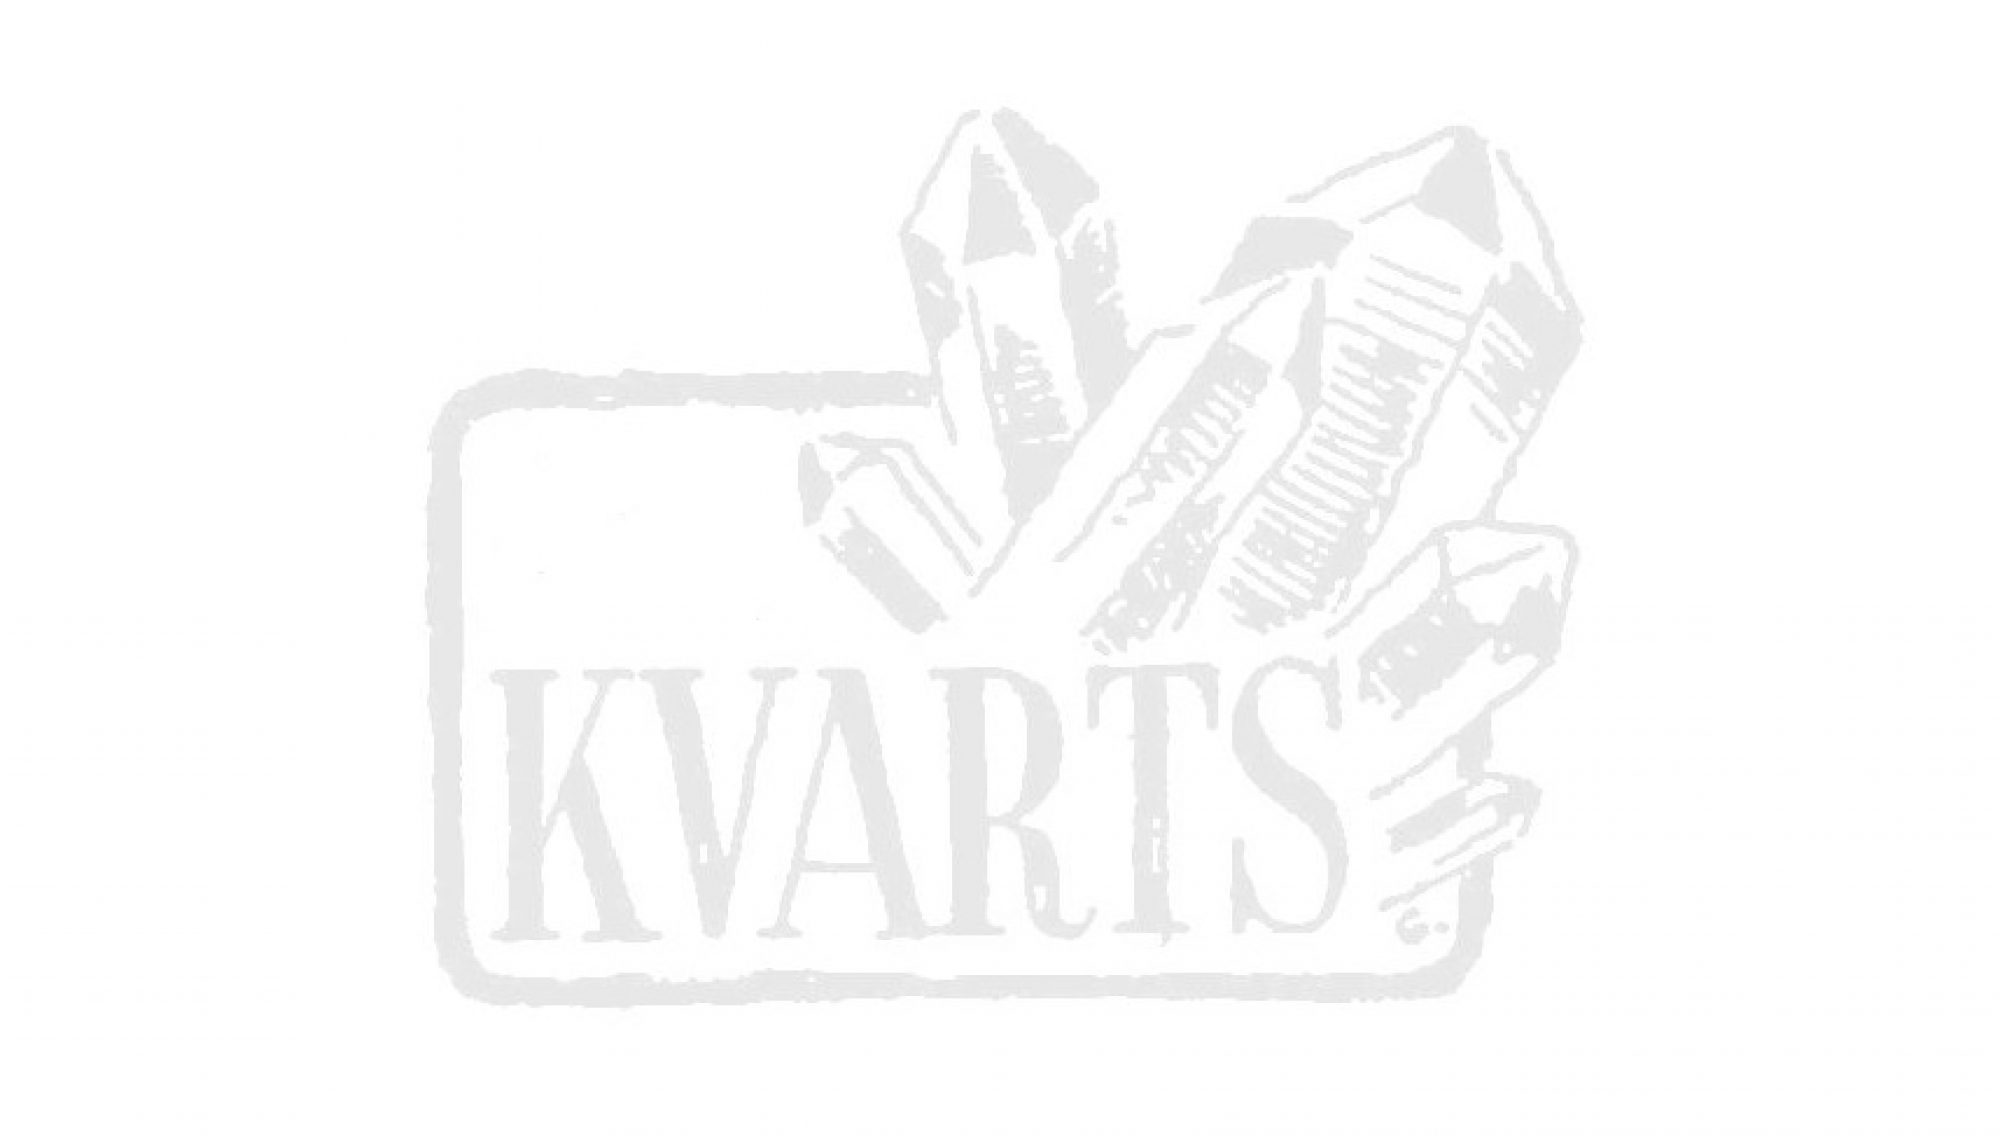 Welcome to www.Kvarts.net